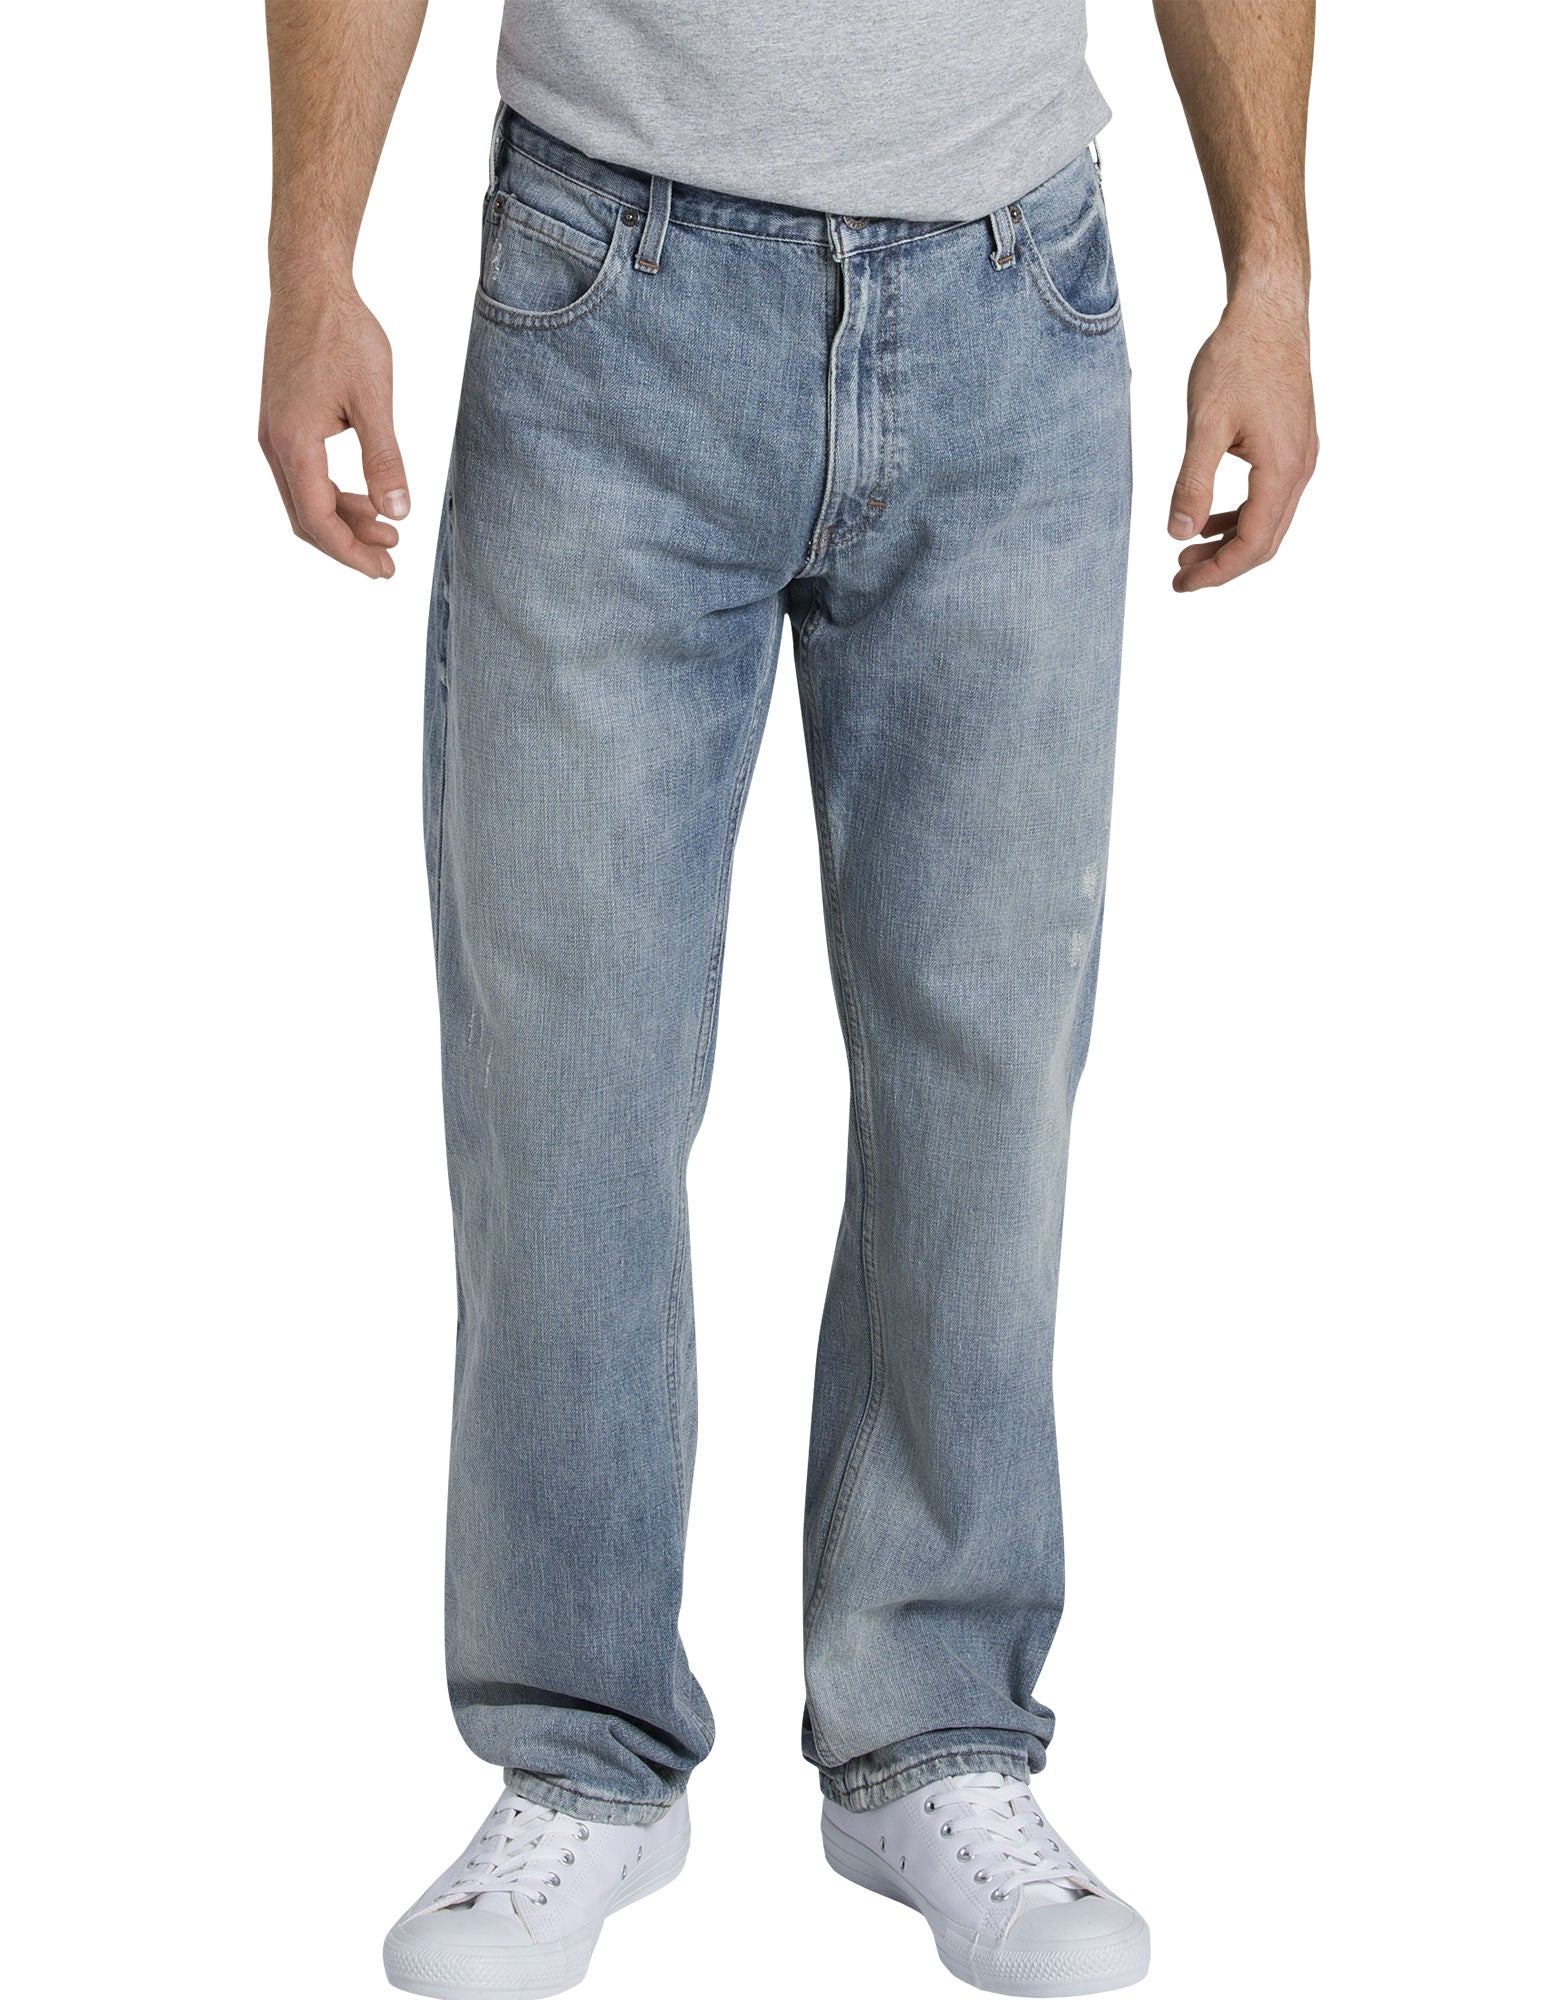 DIC-XD740 - Dickies Mens X-Series Relaxed Fit Straight Leg 5-Pocket ...